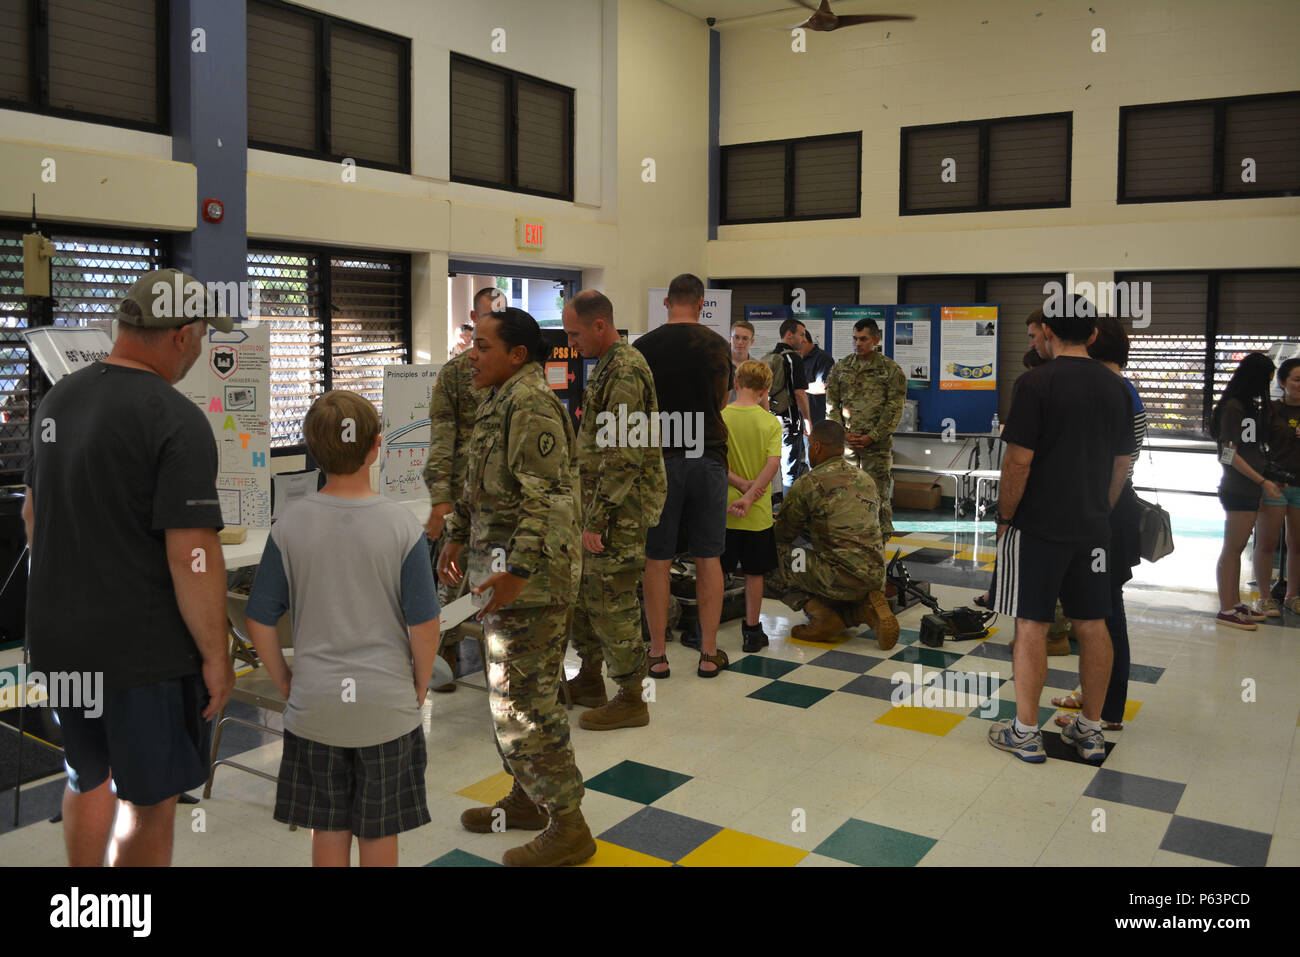 #USArmy Soldiers from 65th Brigade Engineer Battalion, 2nd Brigade Combat Team, 25th Infantry Division, visit Mililani Mauka Elementary School to take part in their science, technology, engineering and math education (STEM) night Apr. 9, 2016. Events such as these provide Soldiers a chance to interact with families, students and the community by improving relations. (U.S. Army photo by Staff Sgt. Carlos Davis, 2nd Stryker Brigade Combat Team, 25th Infantry Division Public Affairs). Stock Photo